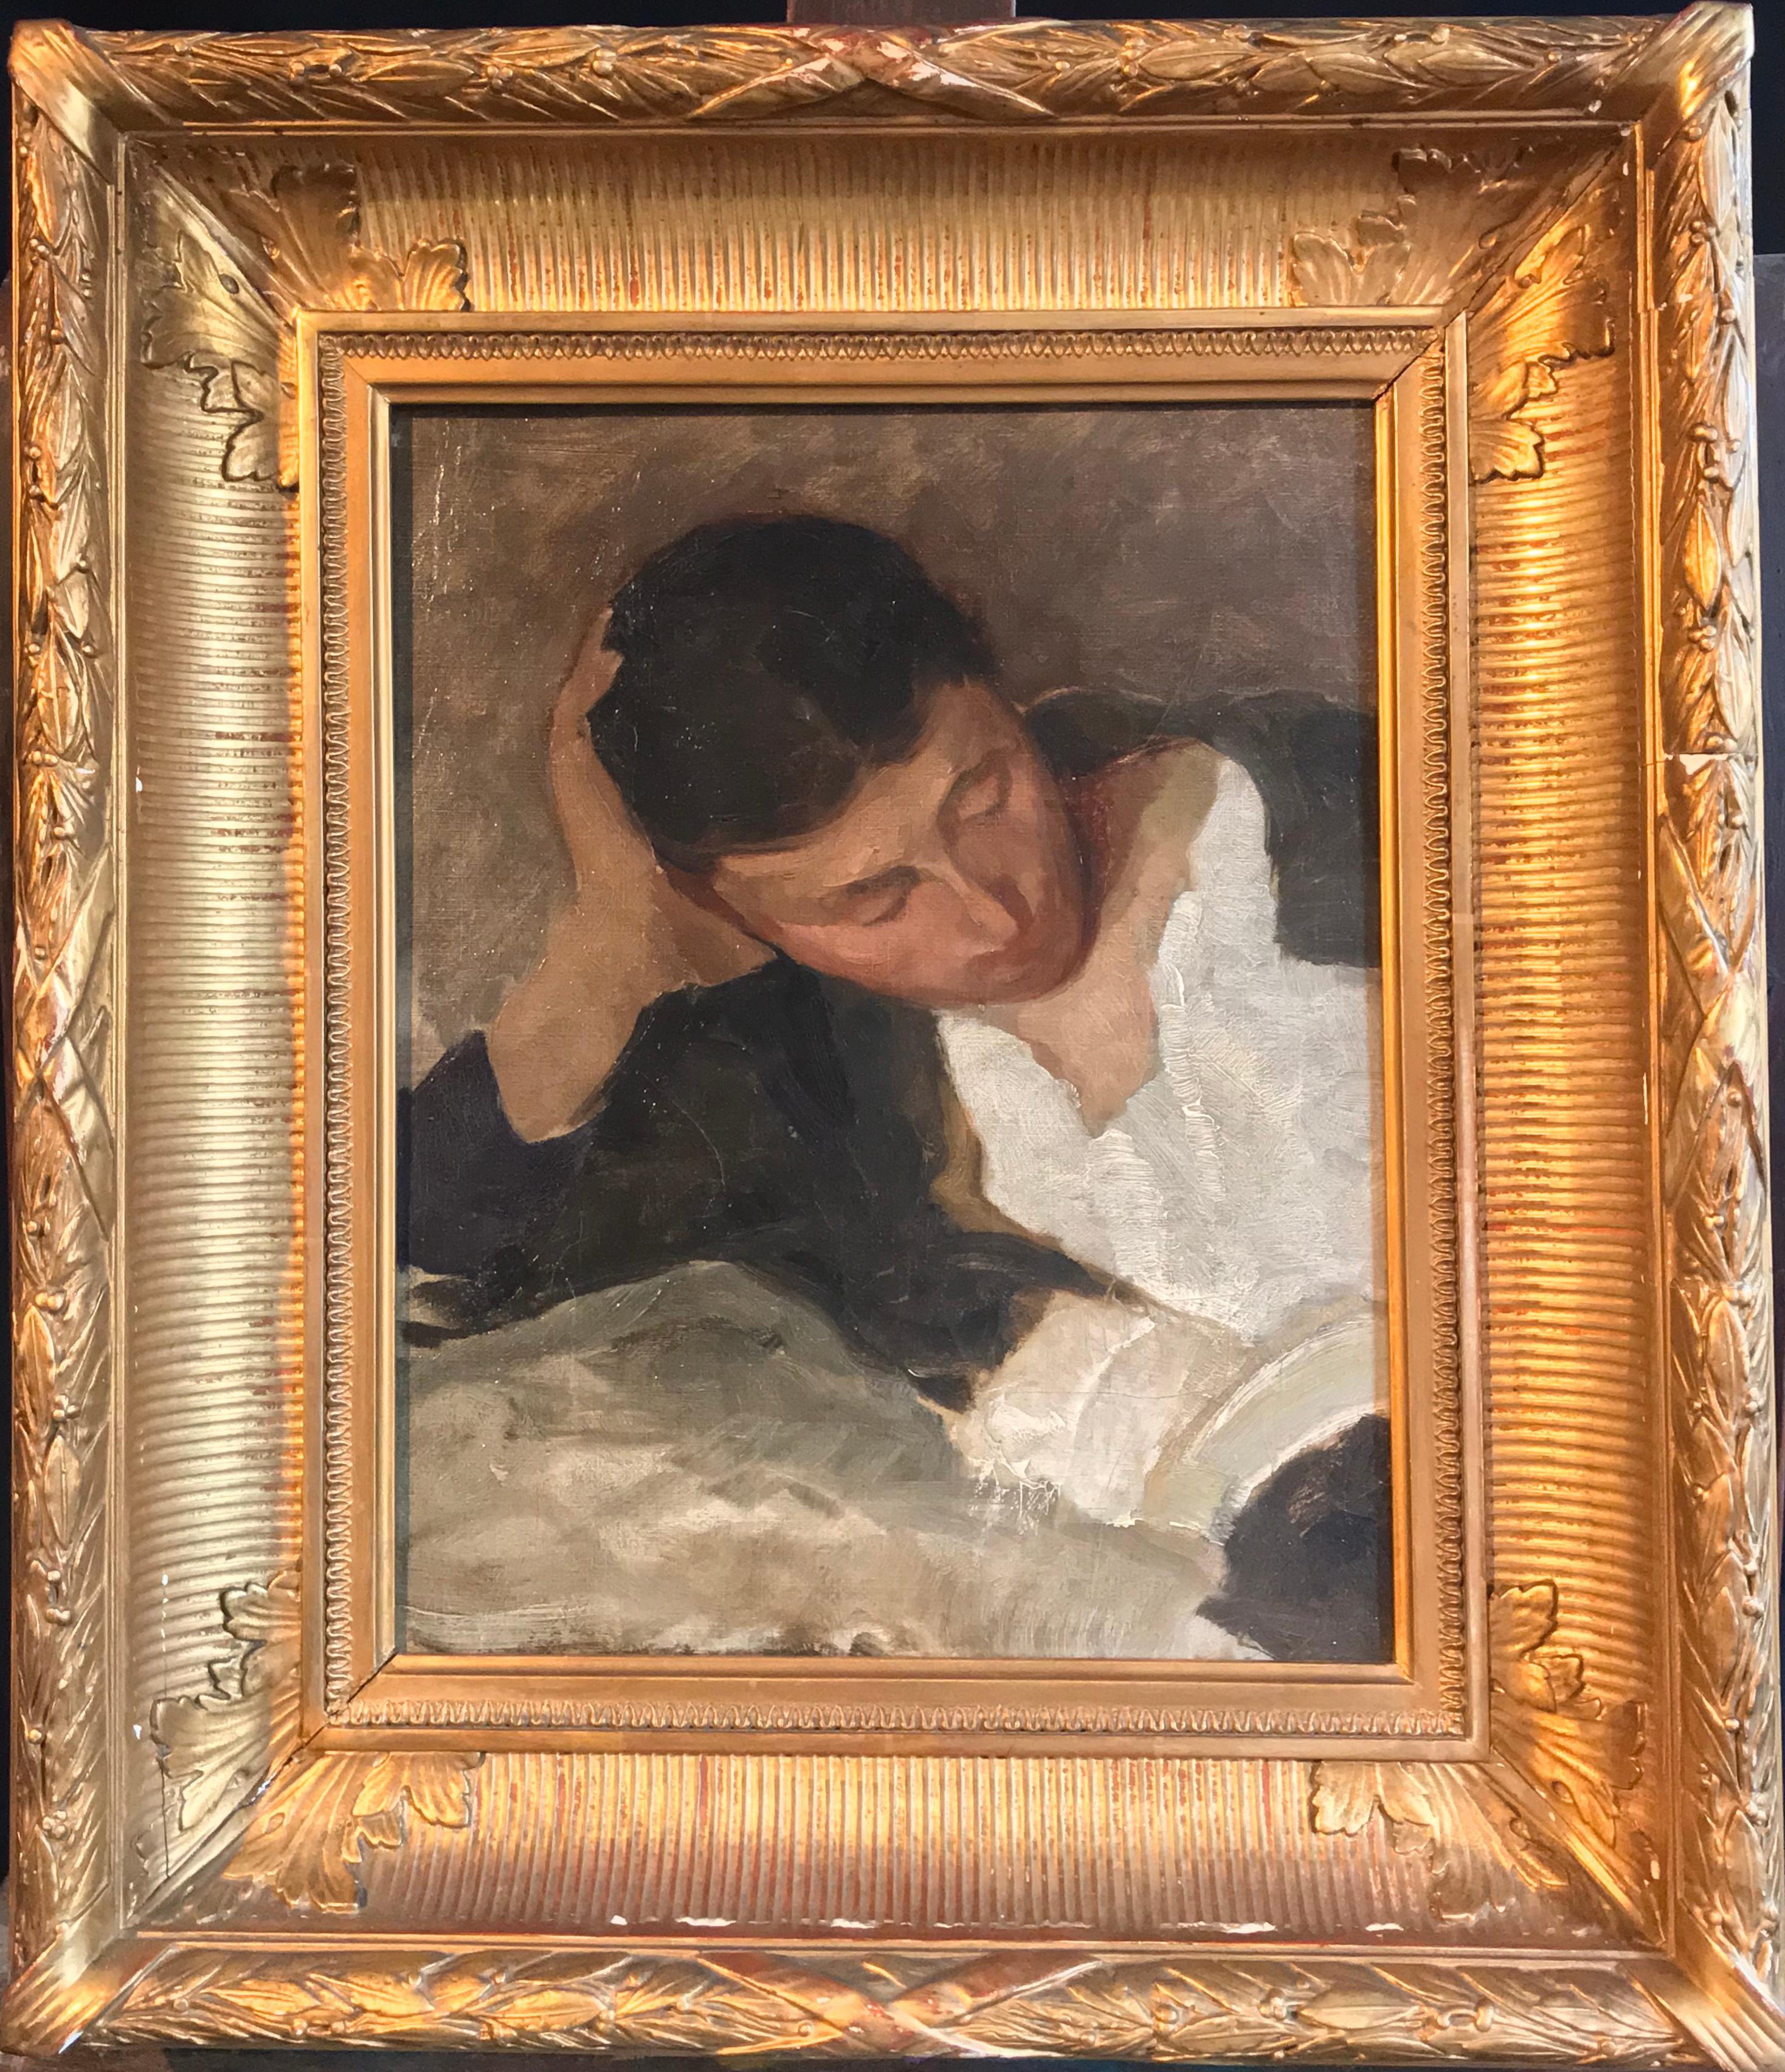 Portrait of a Woman
French School, circa 1890's
oil painting on canvas, framed
canvas: 16 x 13 inches
framed: 24 x 22 x 4 inches

provenance: private collection, Provence, France

Very fine original French Impressionist oil painting, dating to the